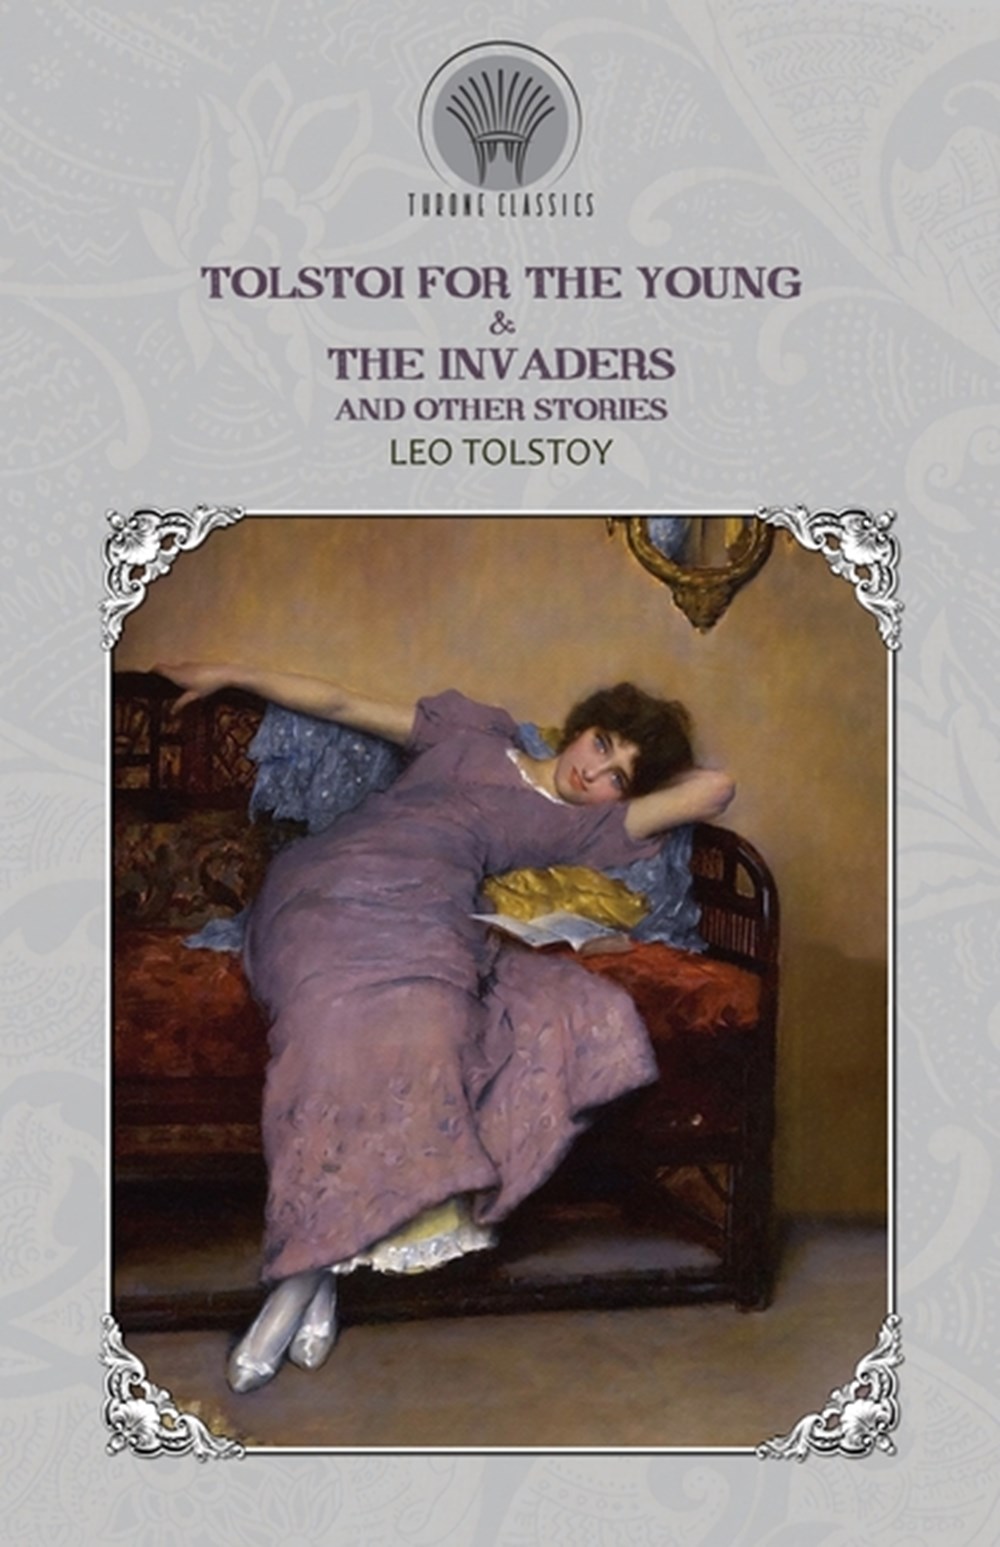 Tolstoi for the Young & The Invaders, and Other Stories